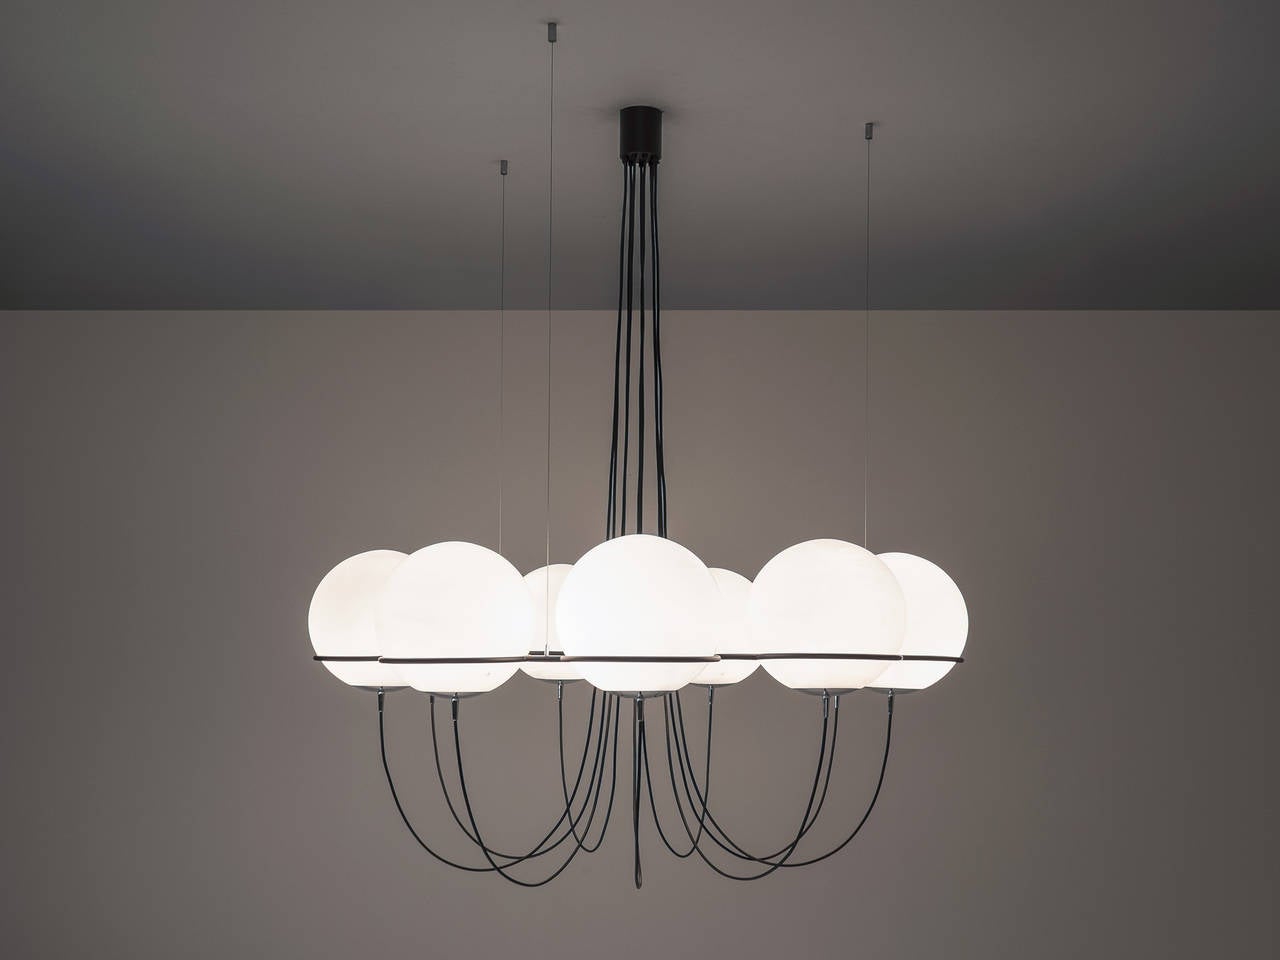 Chandelier, in metal and opal, Europe, 1970s.

Very large chandelier with nine opaline glass bulbs with chrome details. It is obvious that this design is inspired on the earlier designs of Gino Sarfatti for Arteluce, but this one is as well very